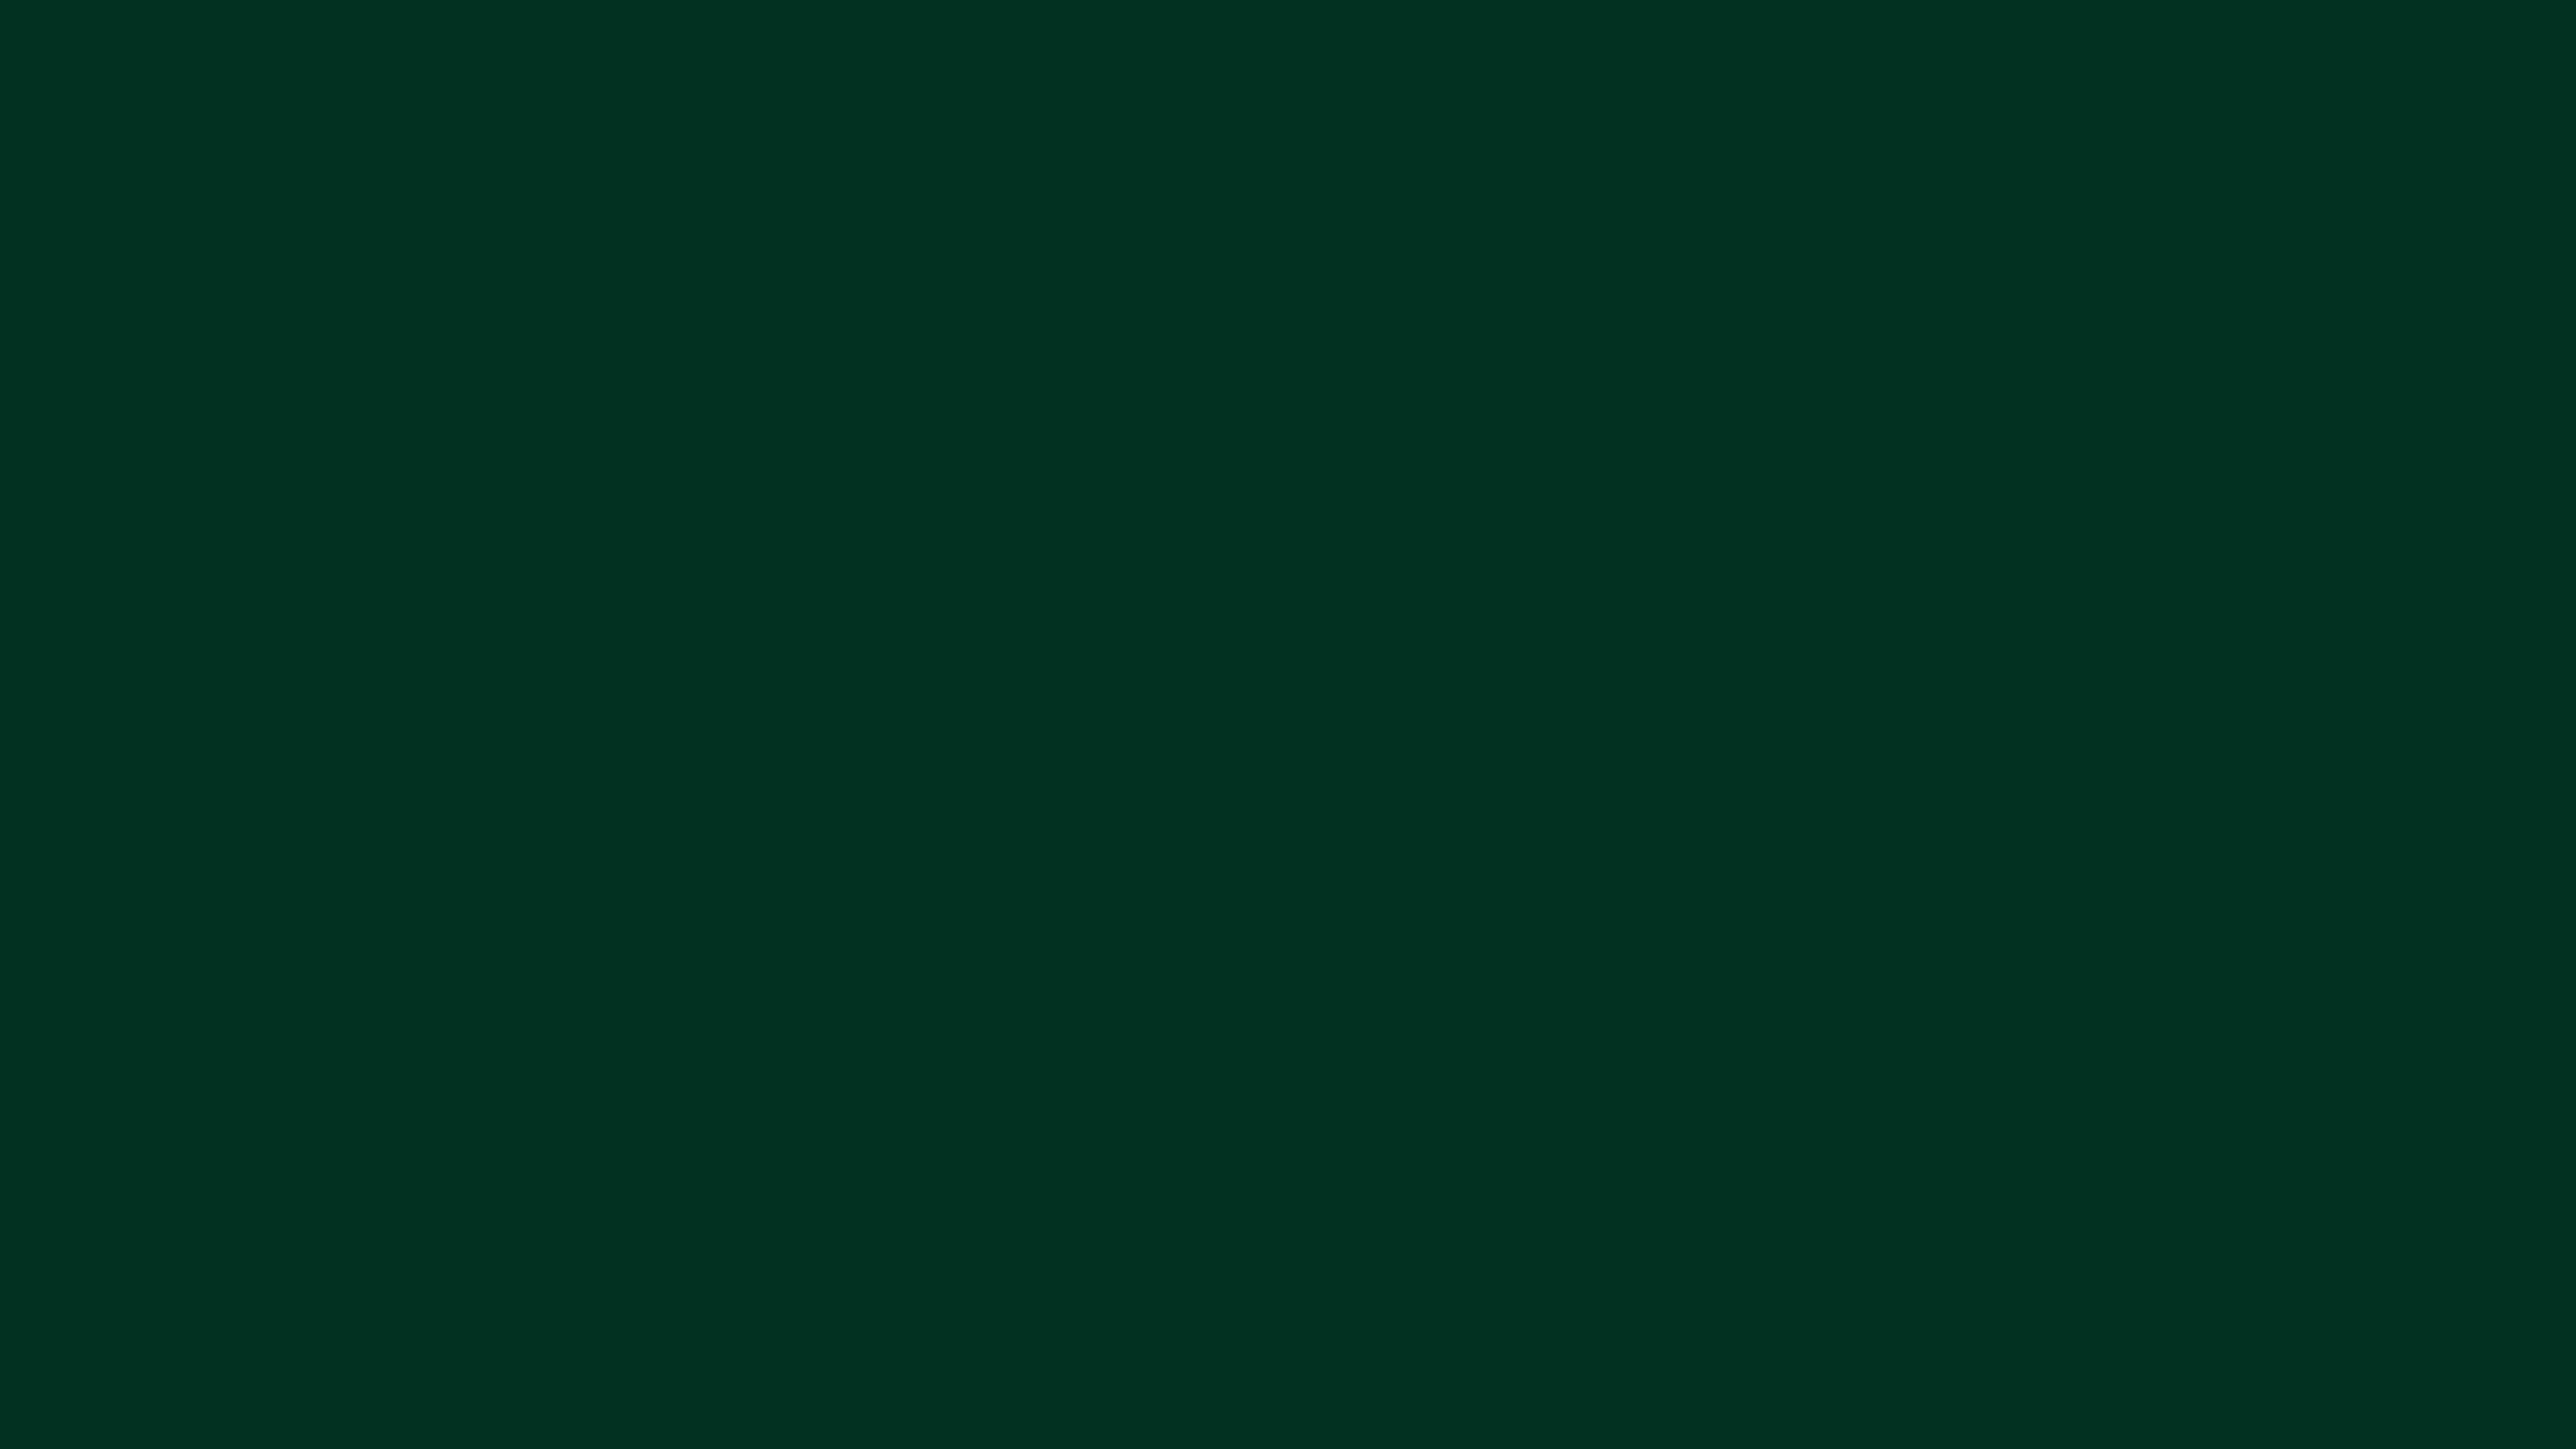 5120x2880 Dark Green Solid Color Background